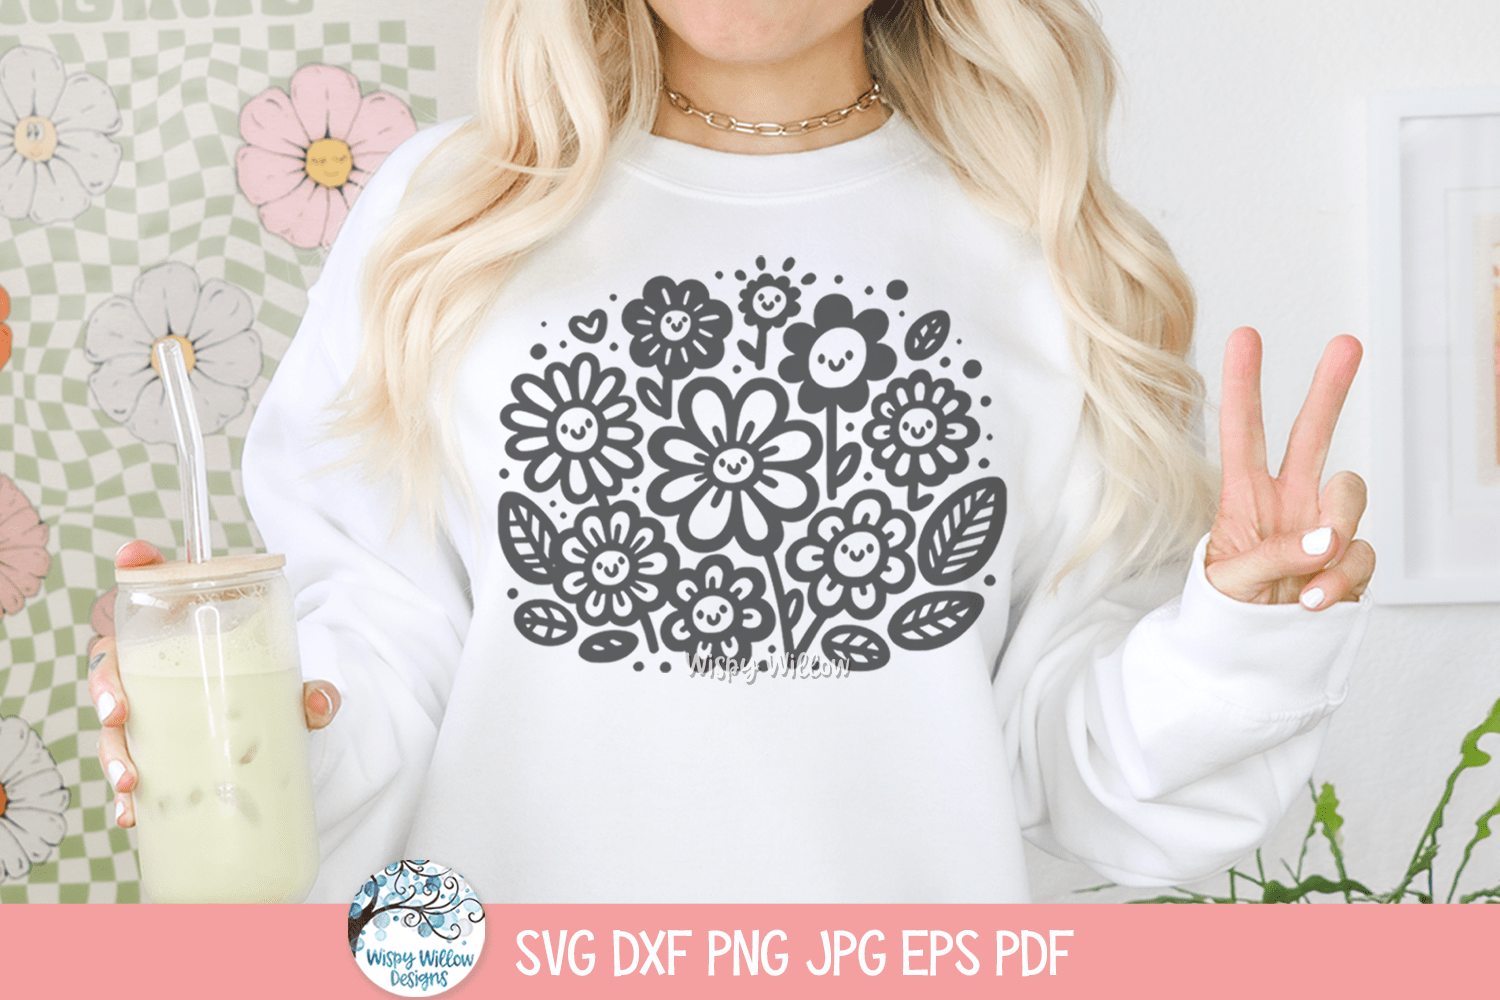 Happy Flowers SVG | Smiling Flower Sketch Shirt Wispy Willow Designs Company